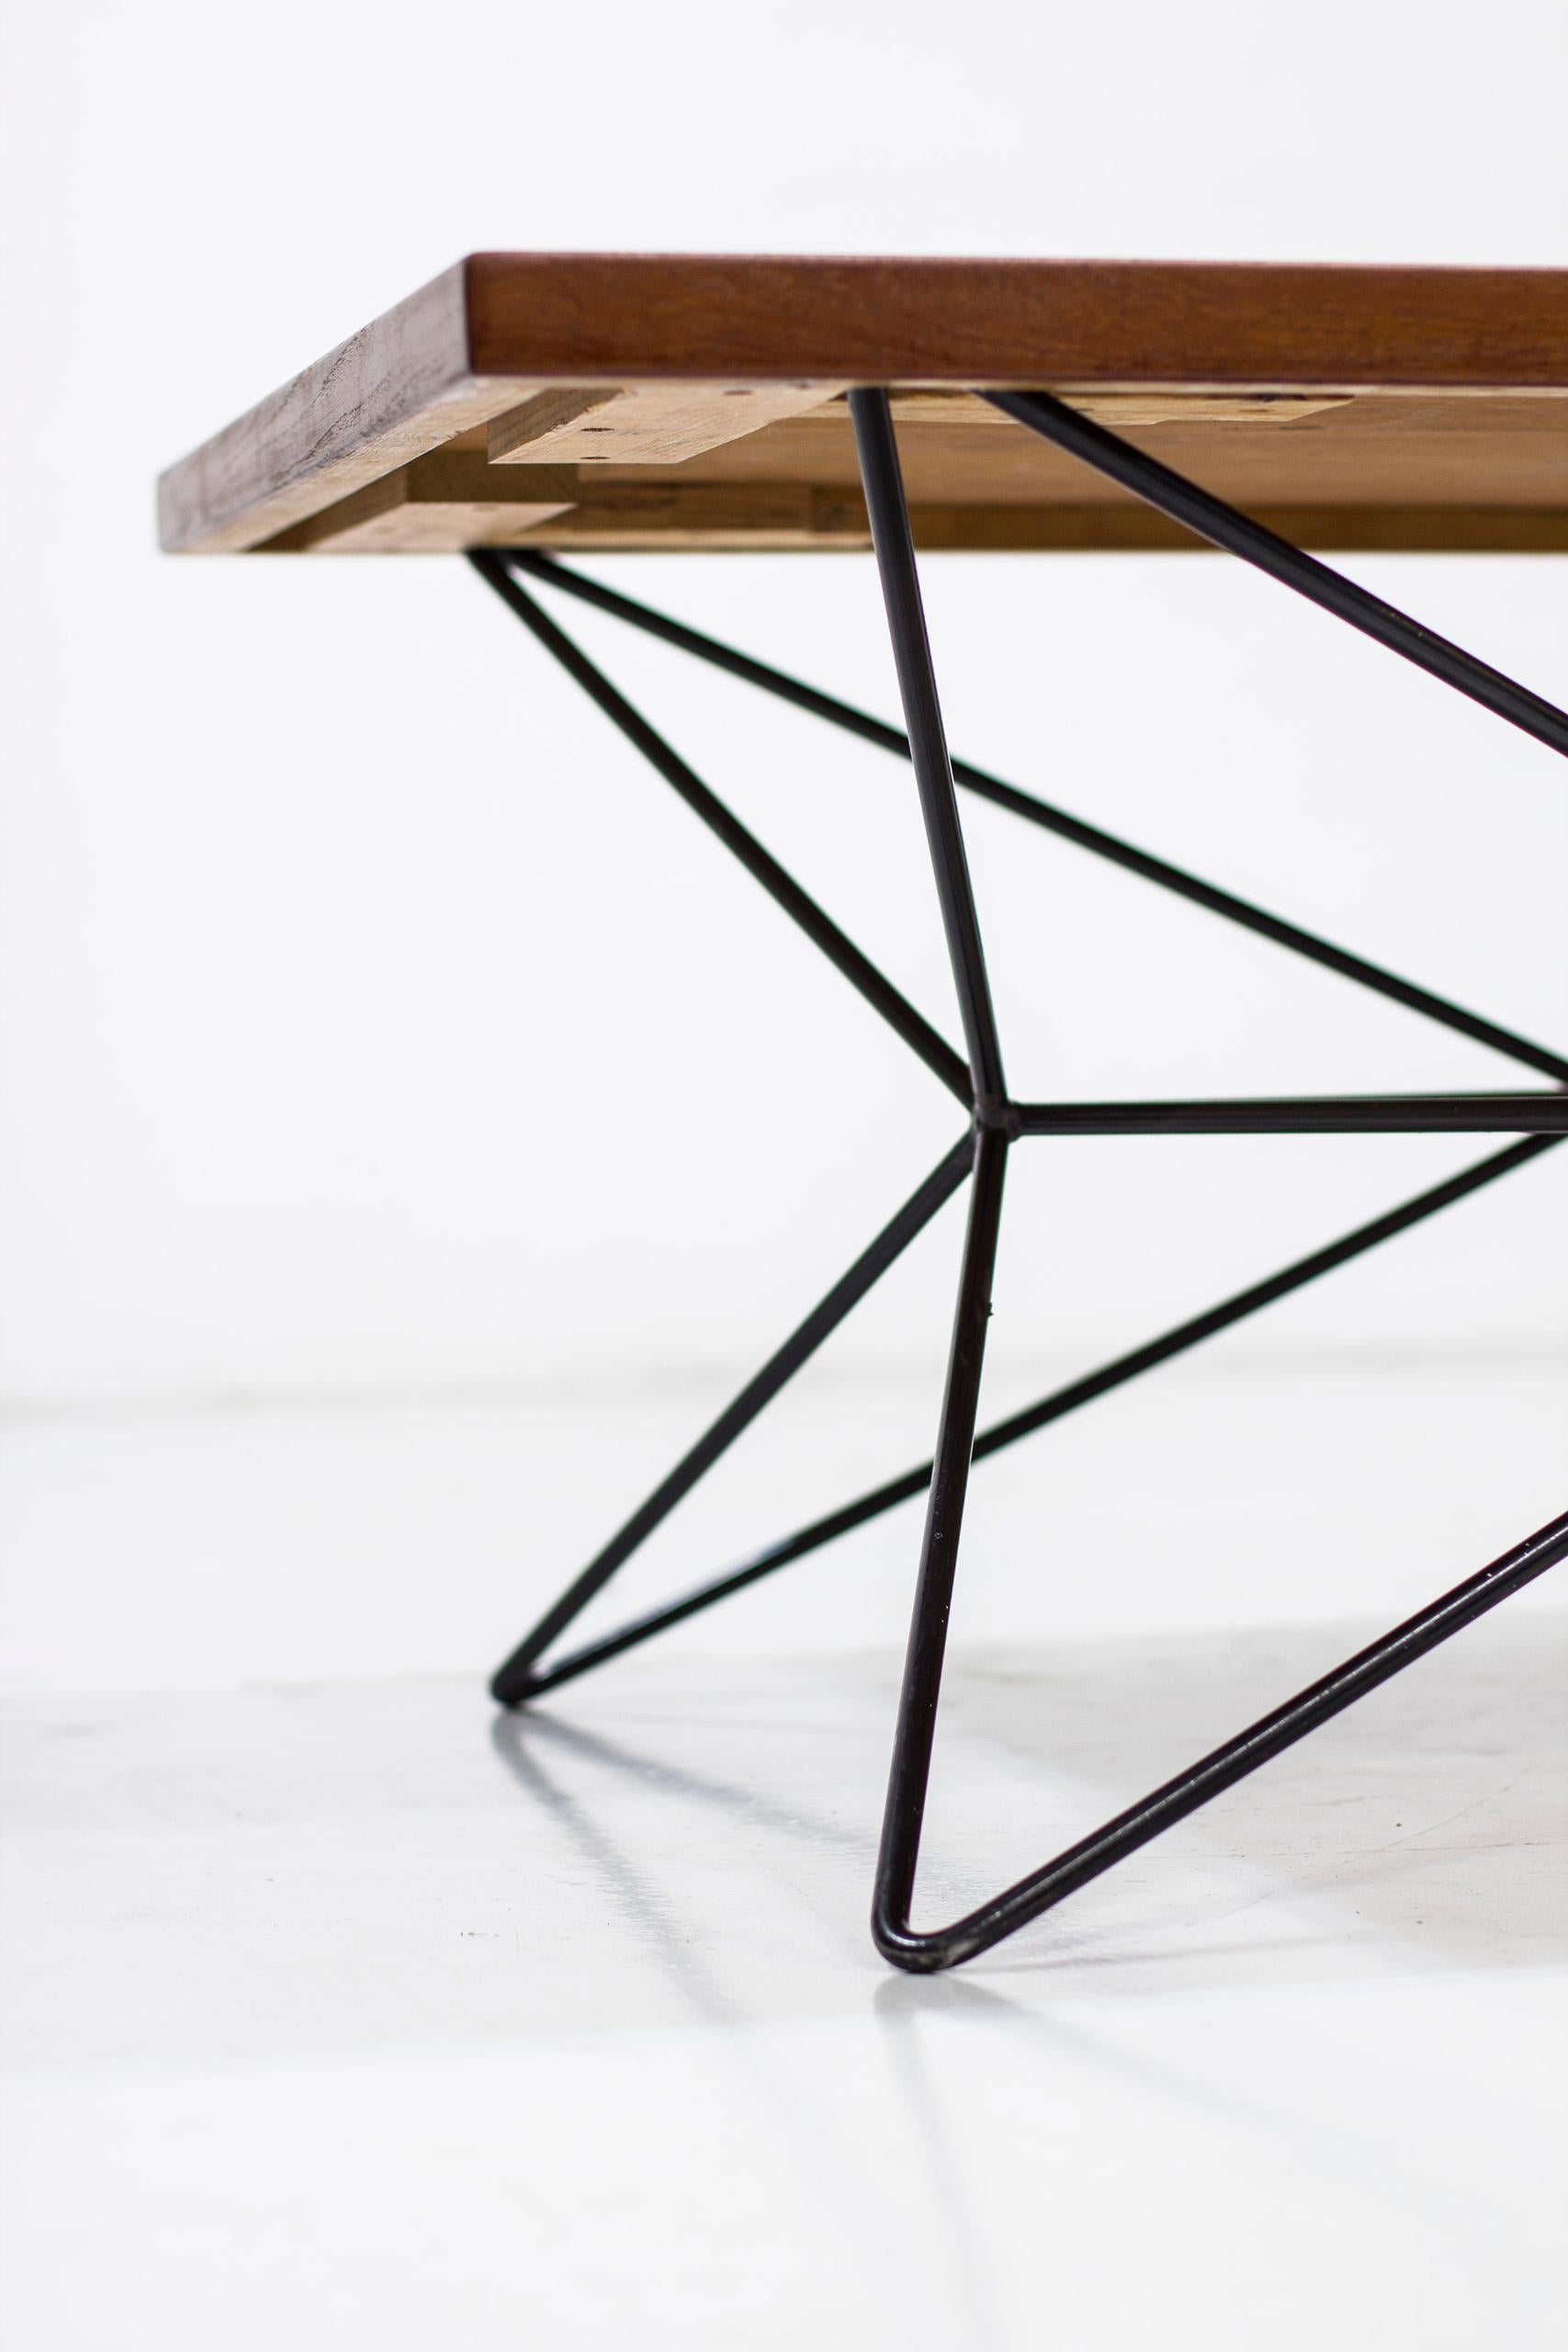 Table multiple scandinave 